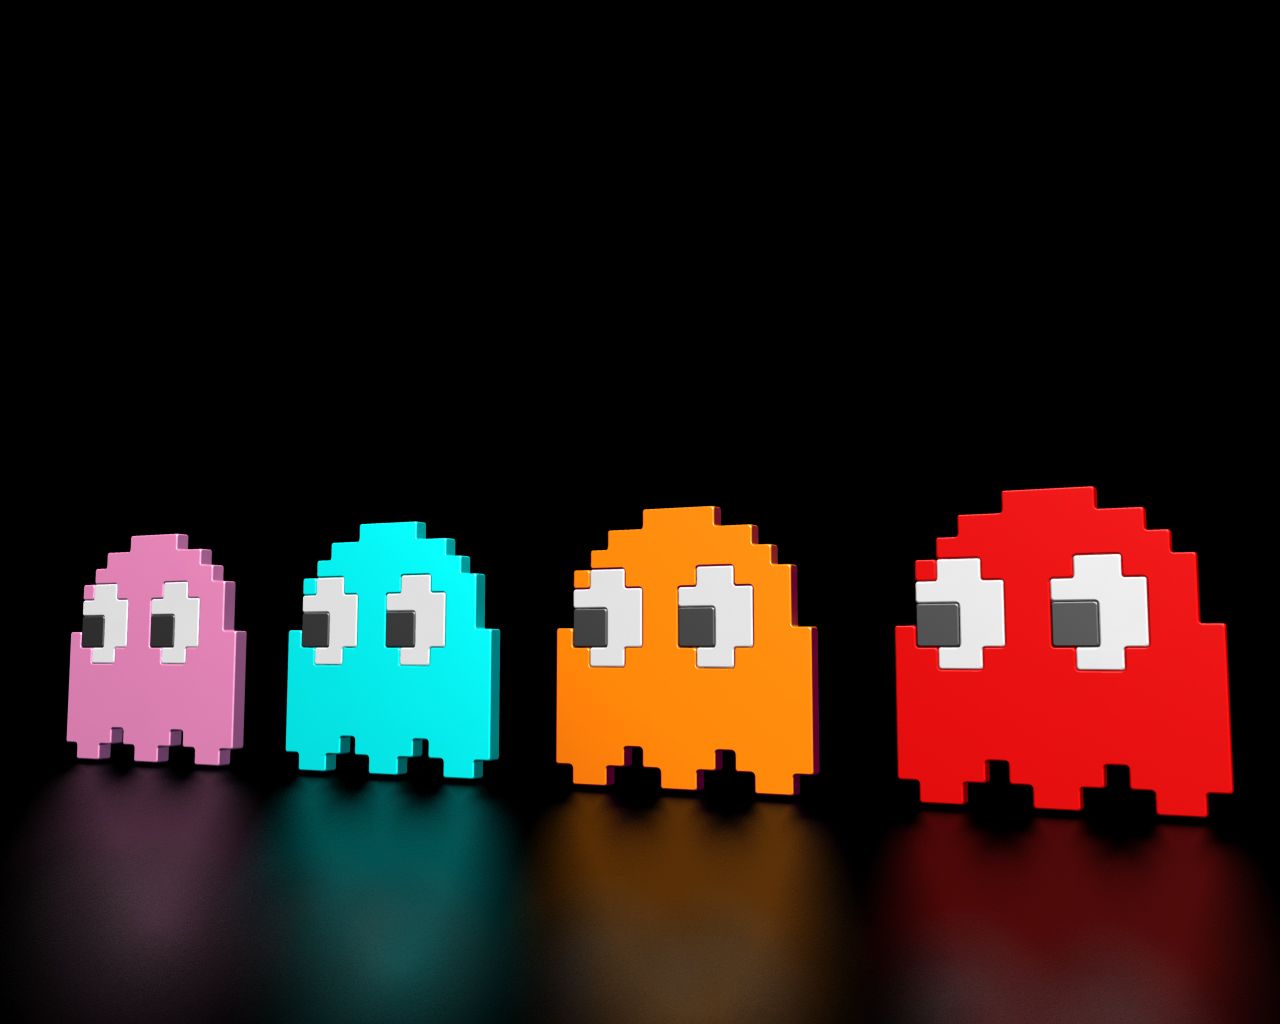 Cool video game wallpapers - Wallpapers Monster Cute Ghosts Arcade ...